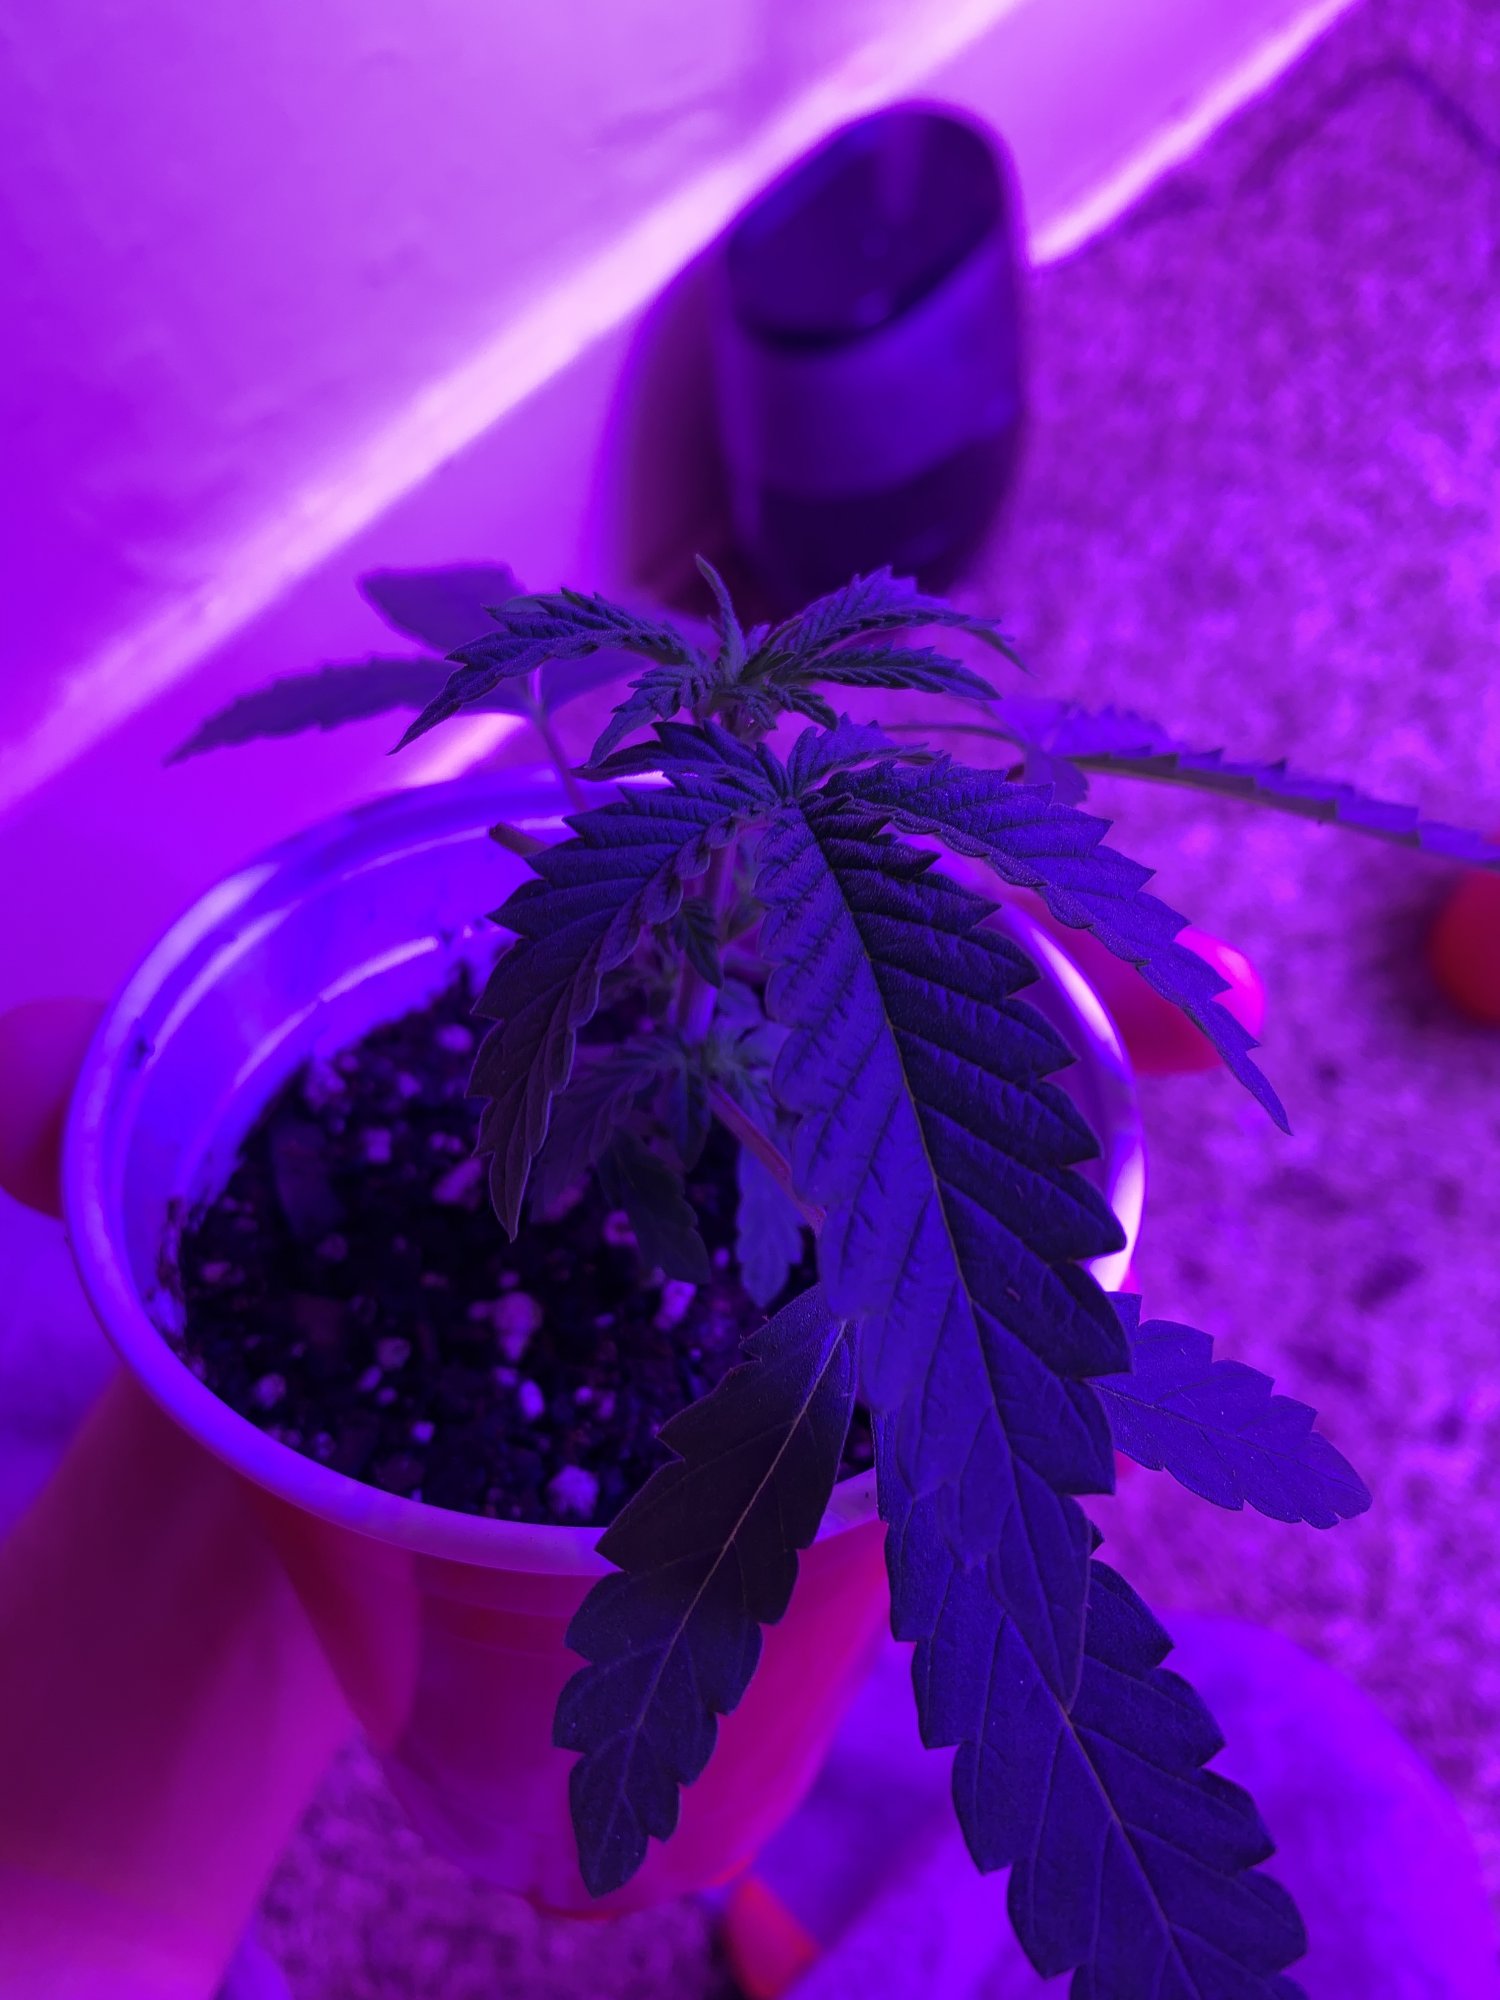 Need advice as soon as possible plants are in critical condition